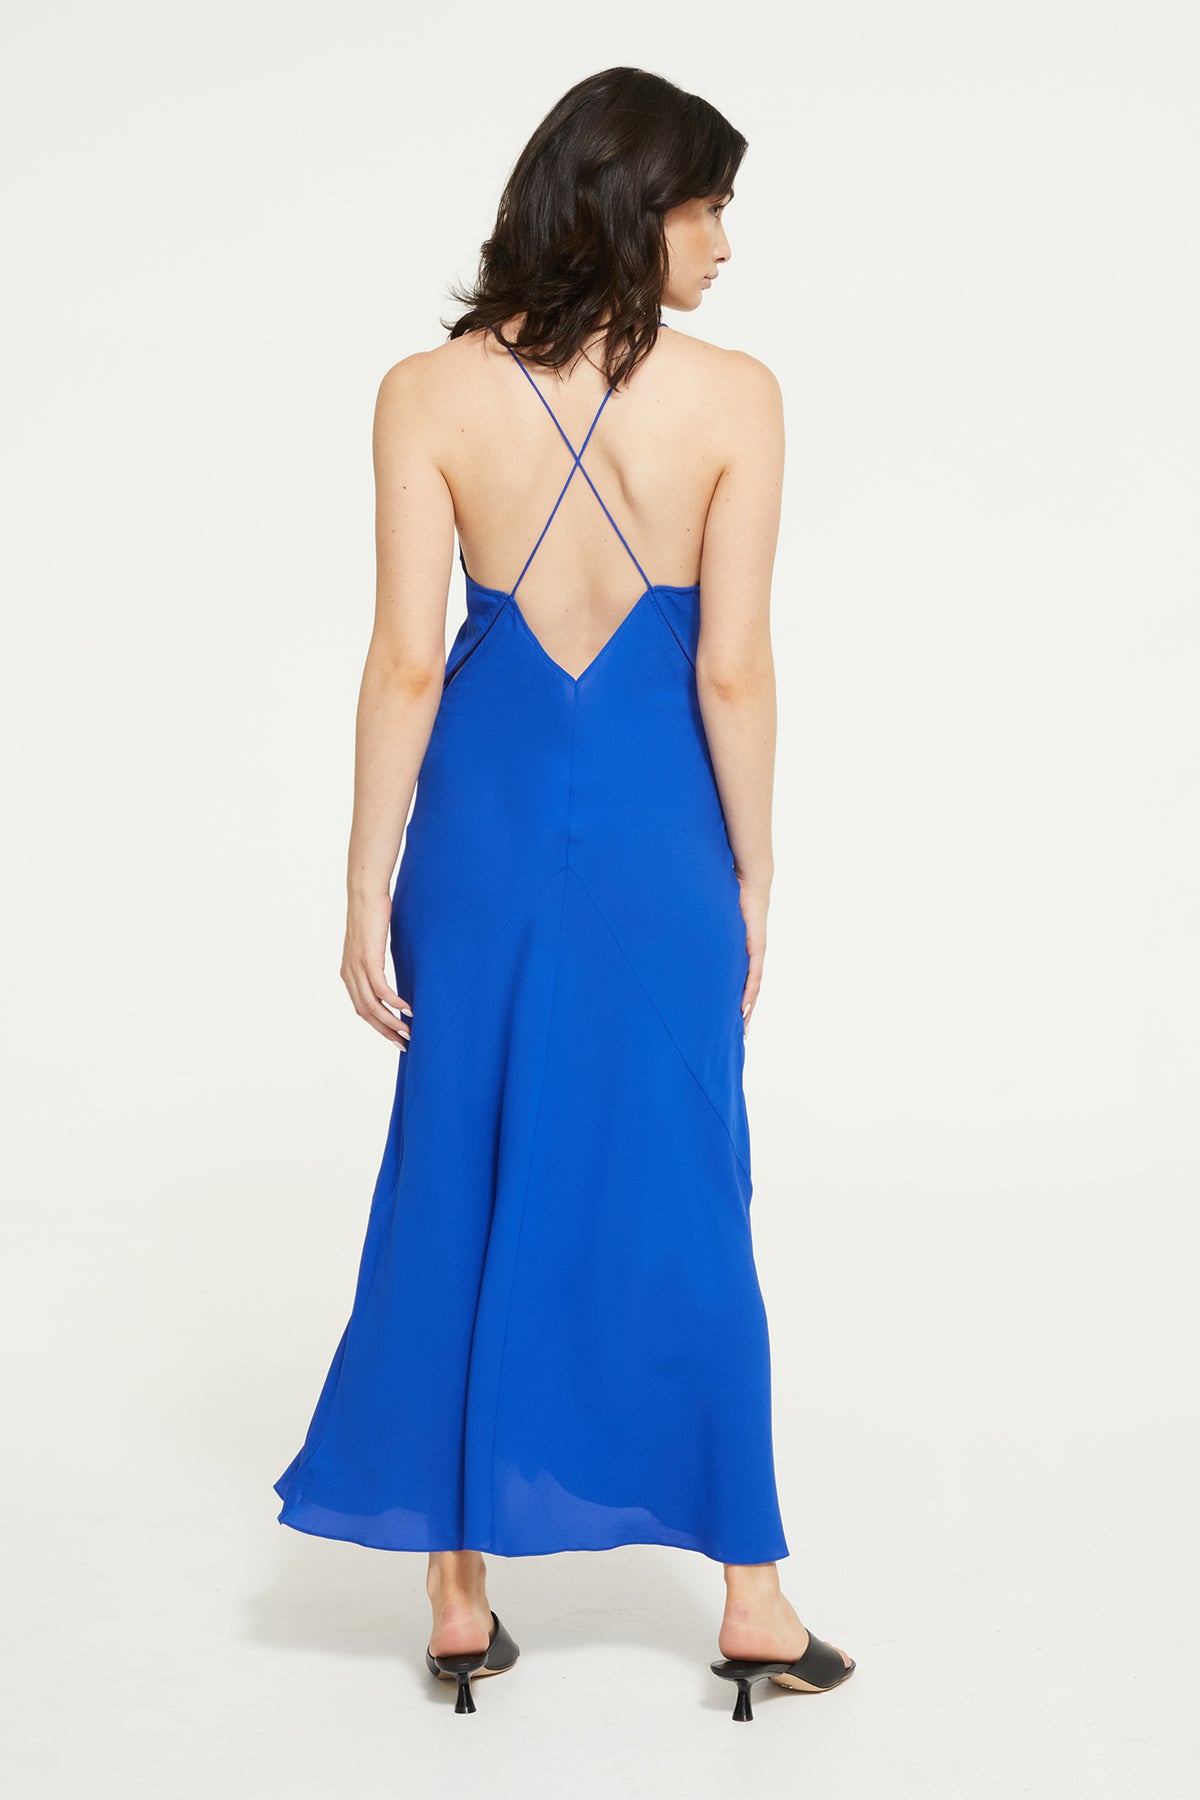 The Rio Dress in Ultra Blue by Ginia RTW